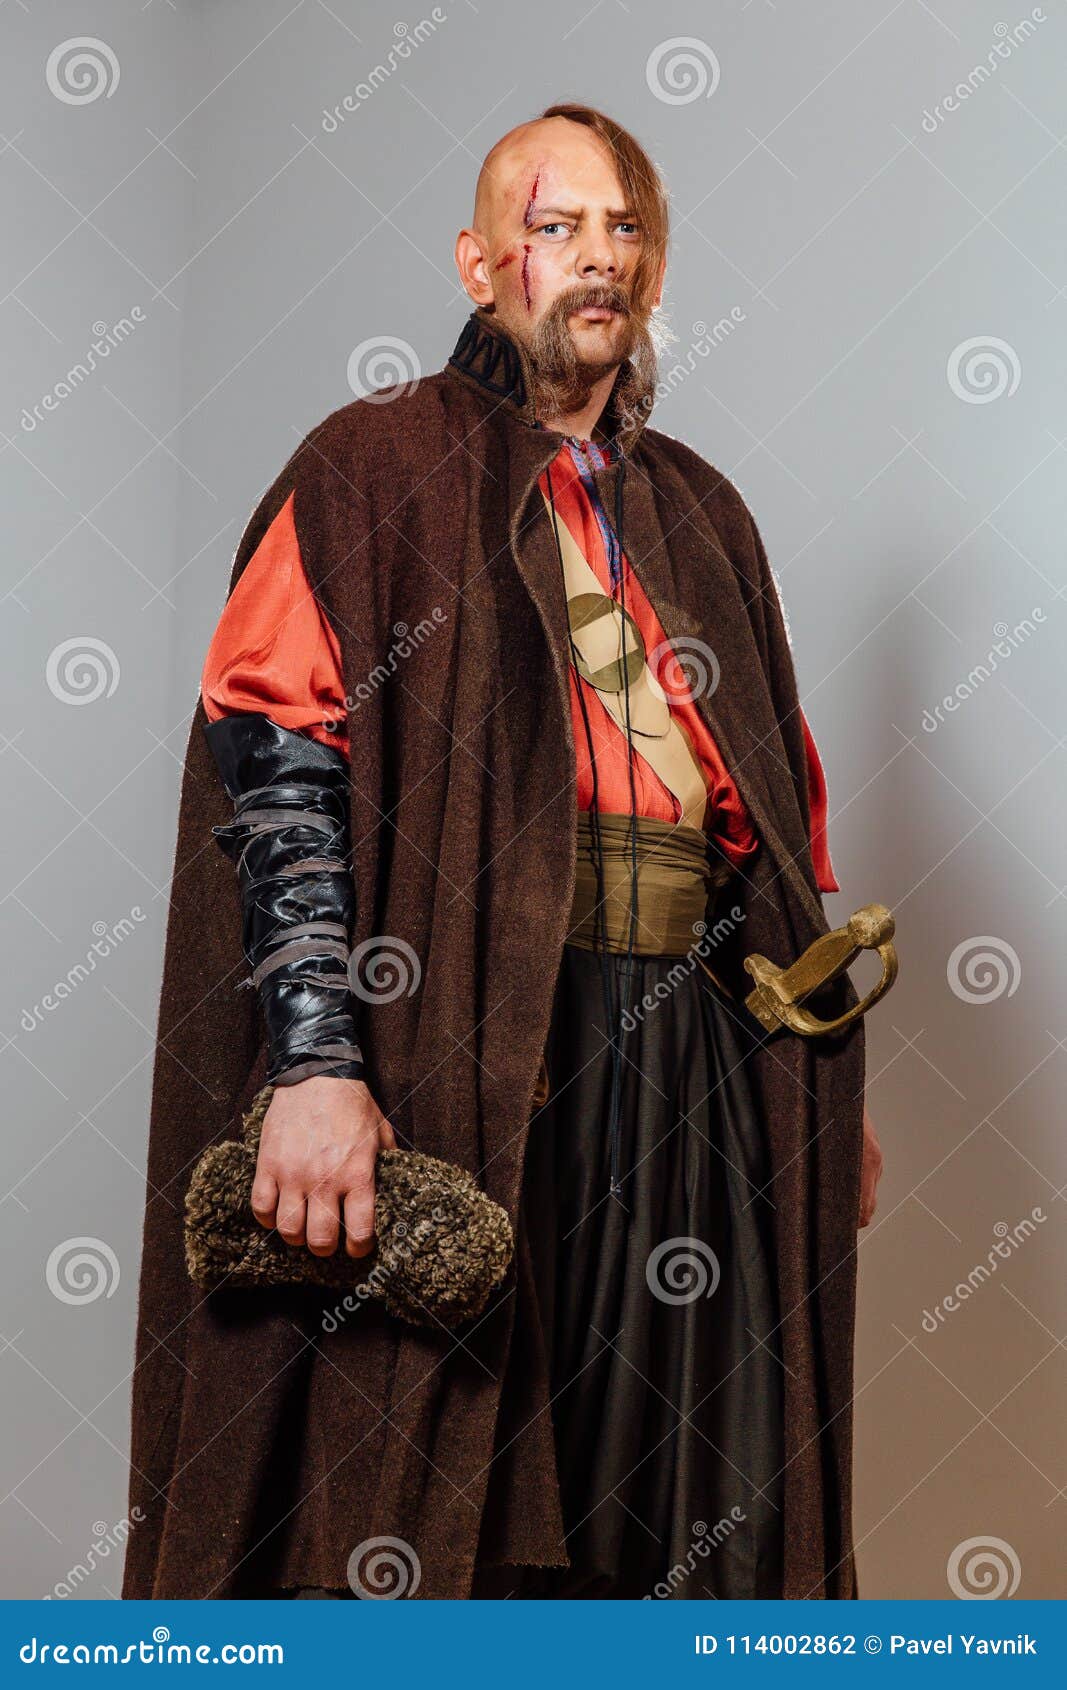 Severe Warrior Russian Cossack, Face in Scars, Bald. Bled Blood. Saber in  Sheath Stock Photo - Image of clothes, armour: 114002862